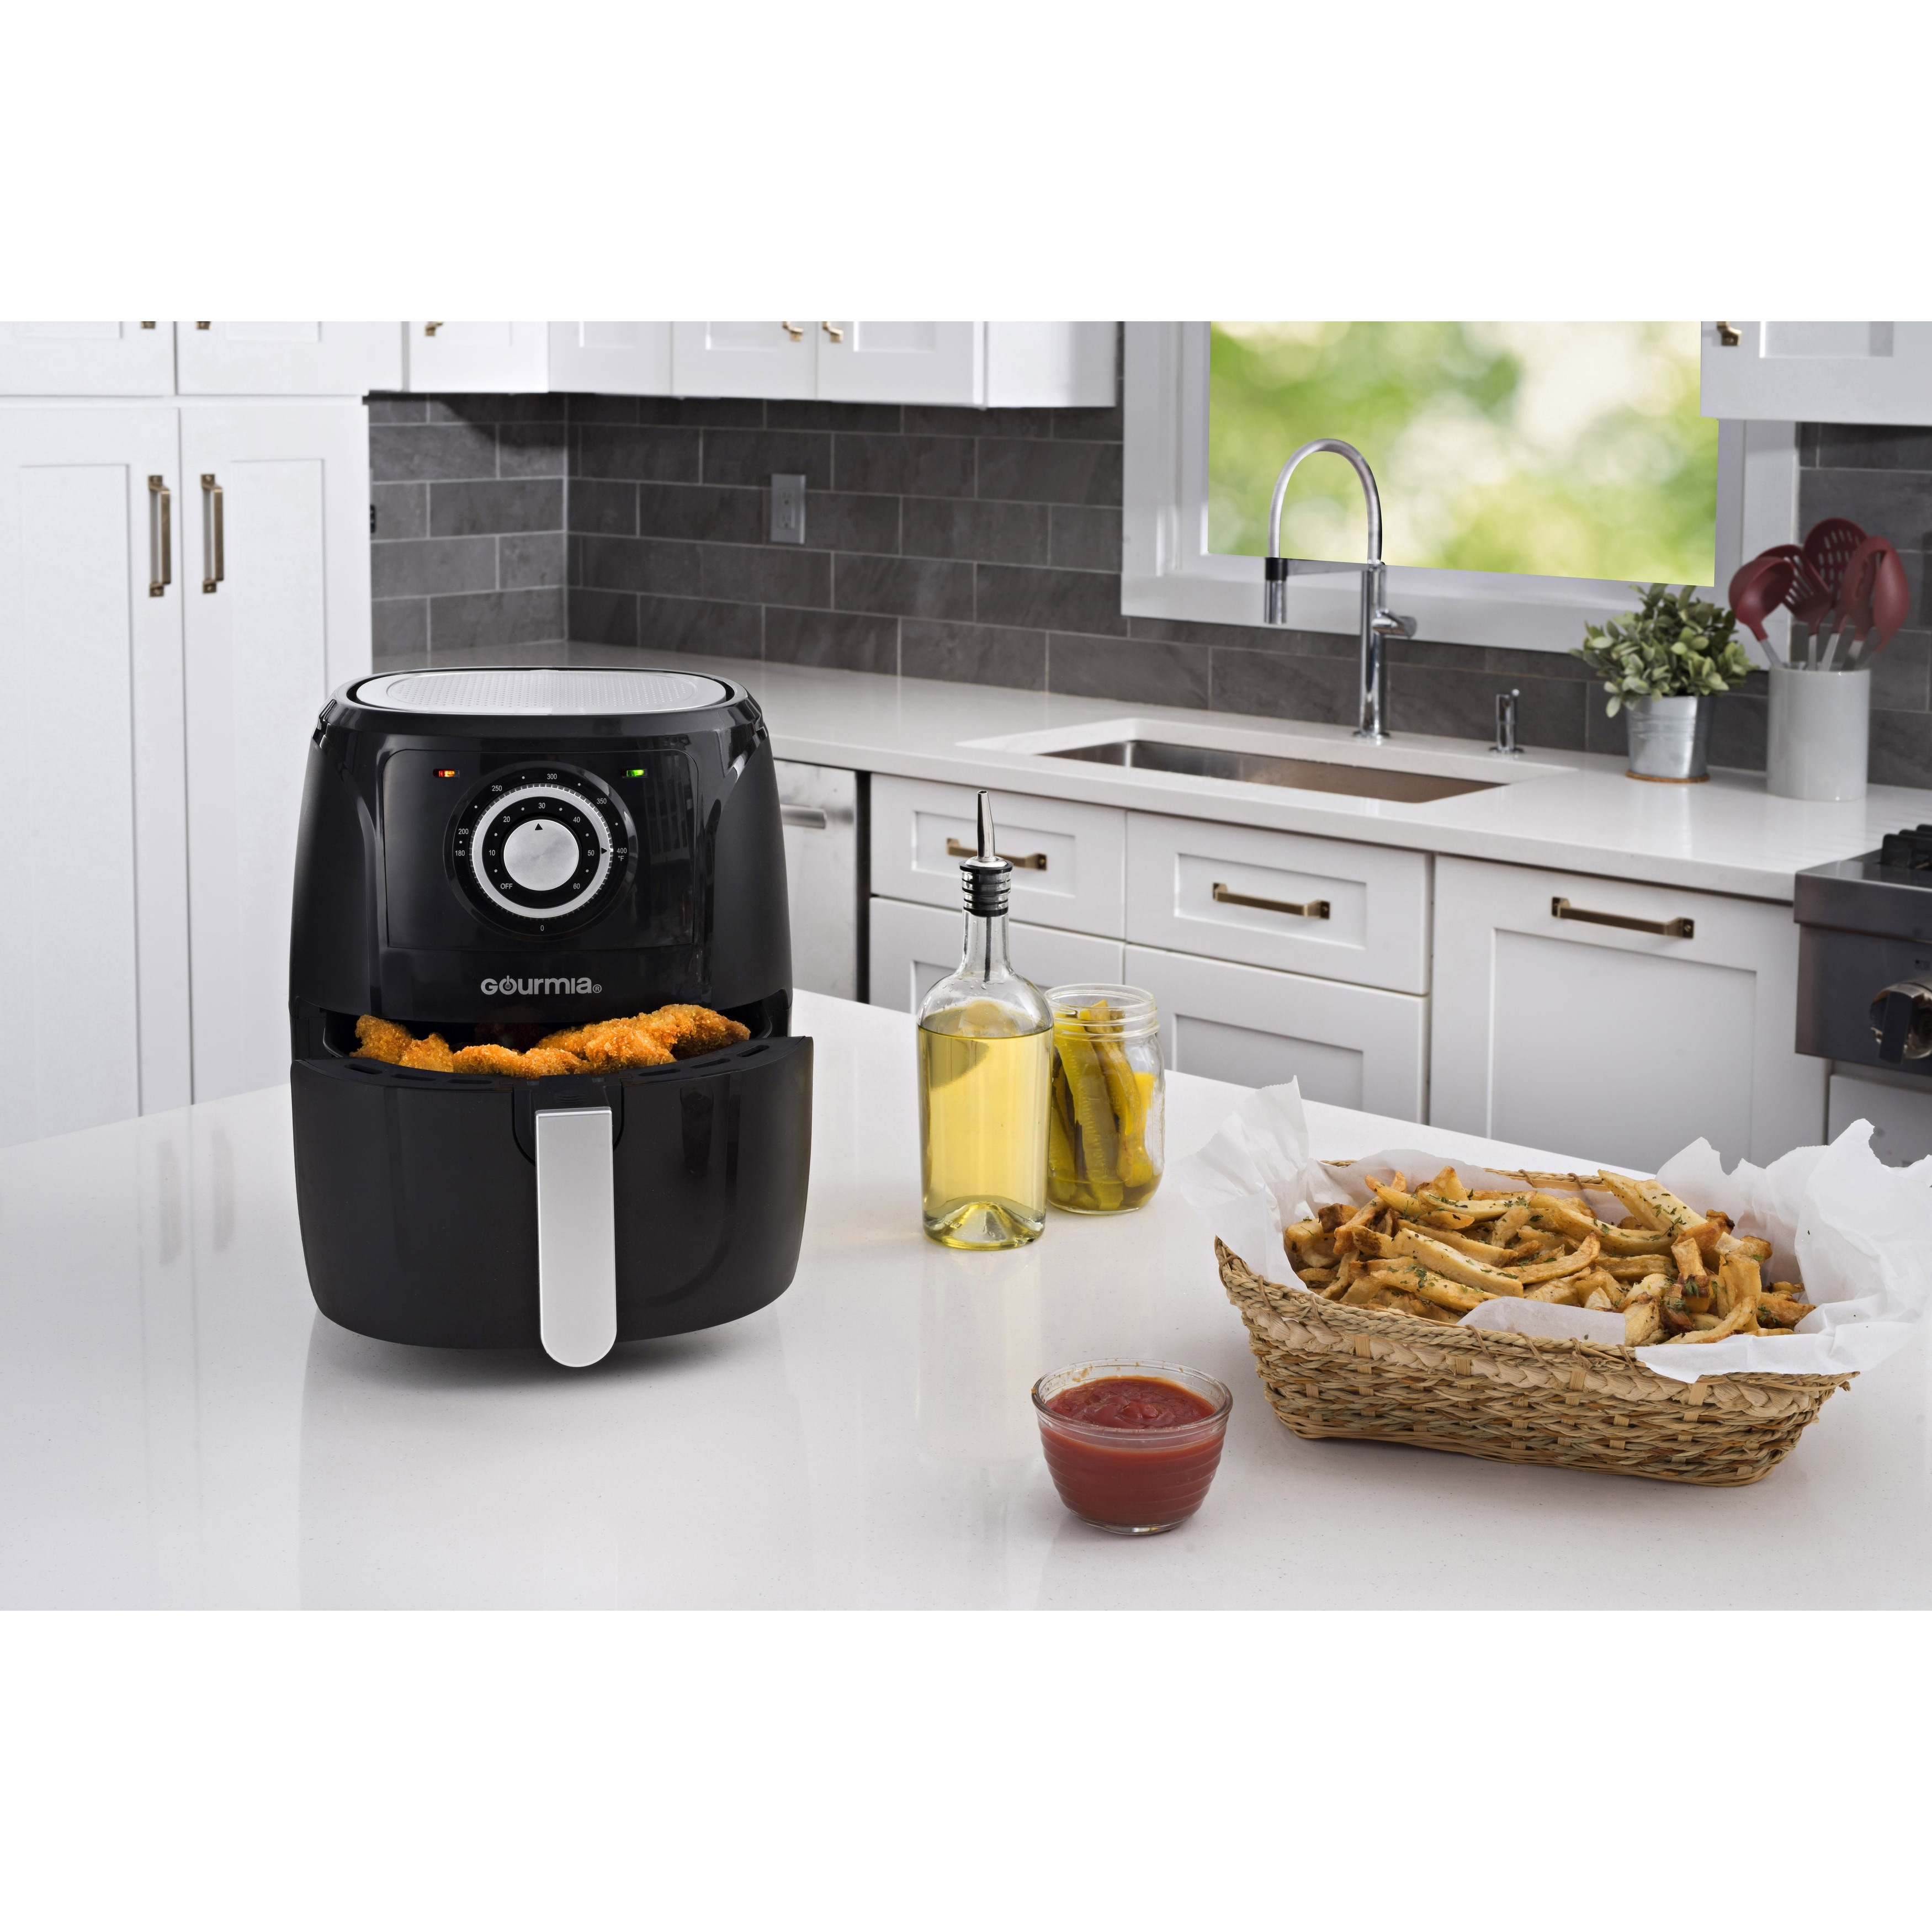 https://ak1.ostkcdn.com/images/products/is/images/direct/f5bca1518485a0d8a1c270ec649768926a1ccac6/5-Qt-Air-Fryer-with-Nonstick-Dishwasher-Safe-Basket%2C-Black.jpg